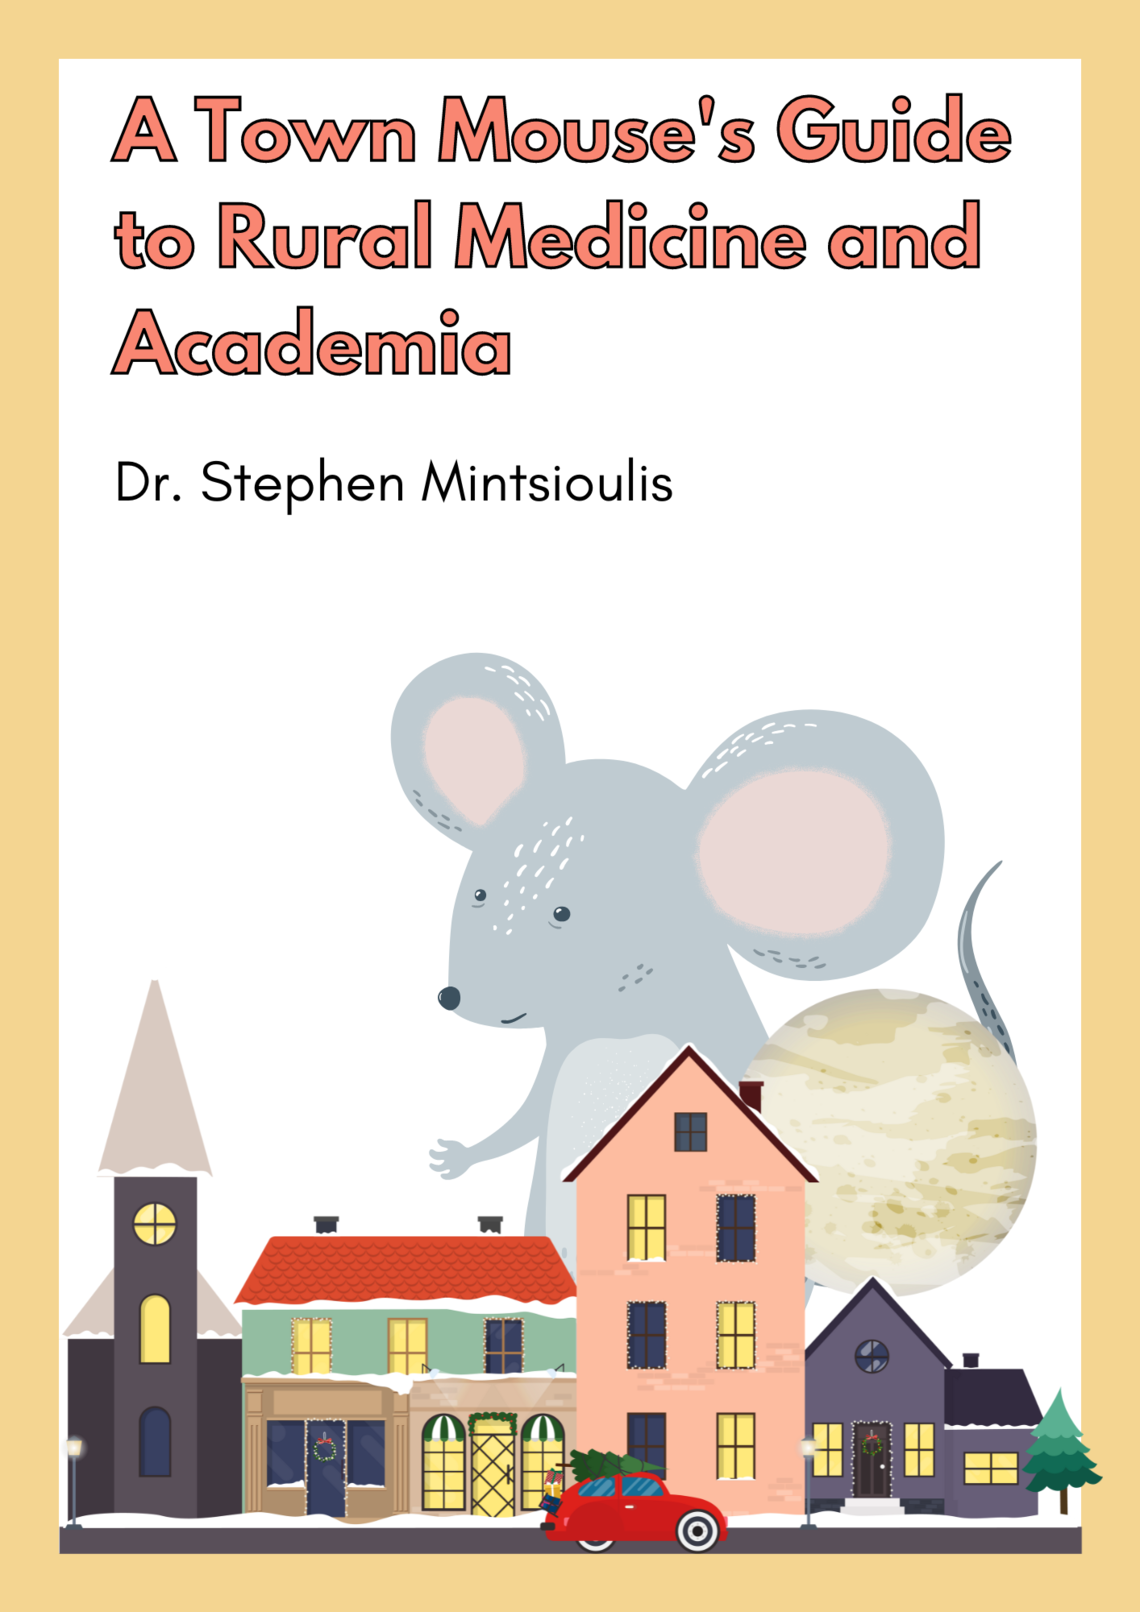 A Town Mouse's Guide to Rural Medicine and Academia